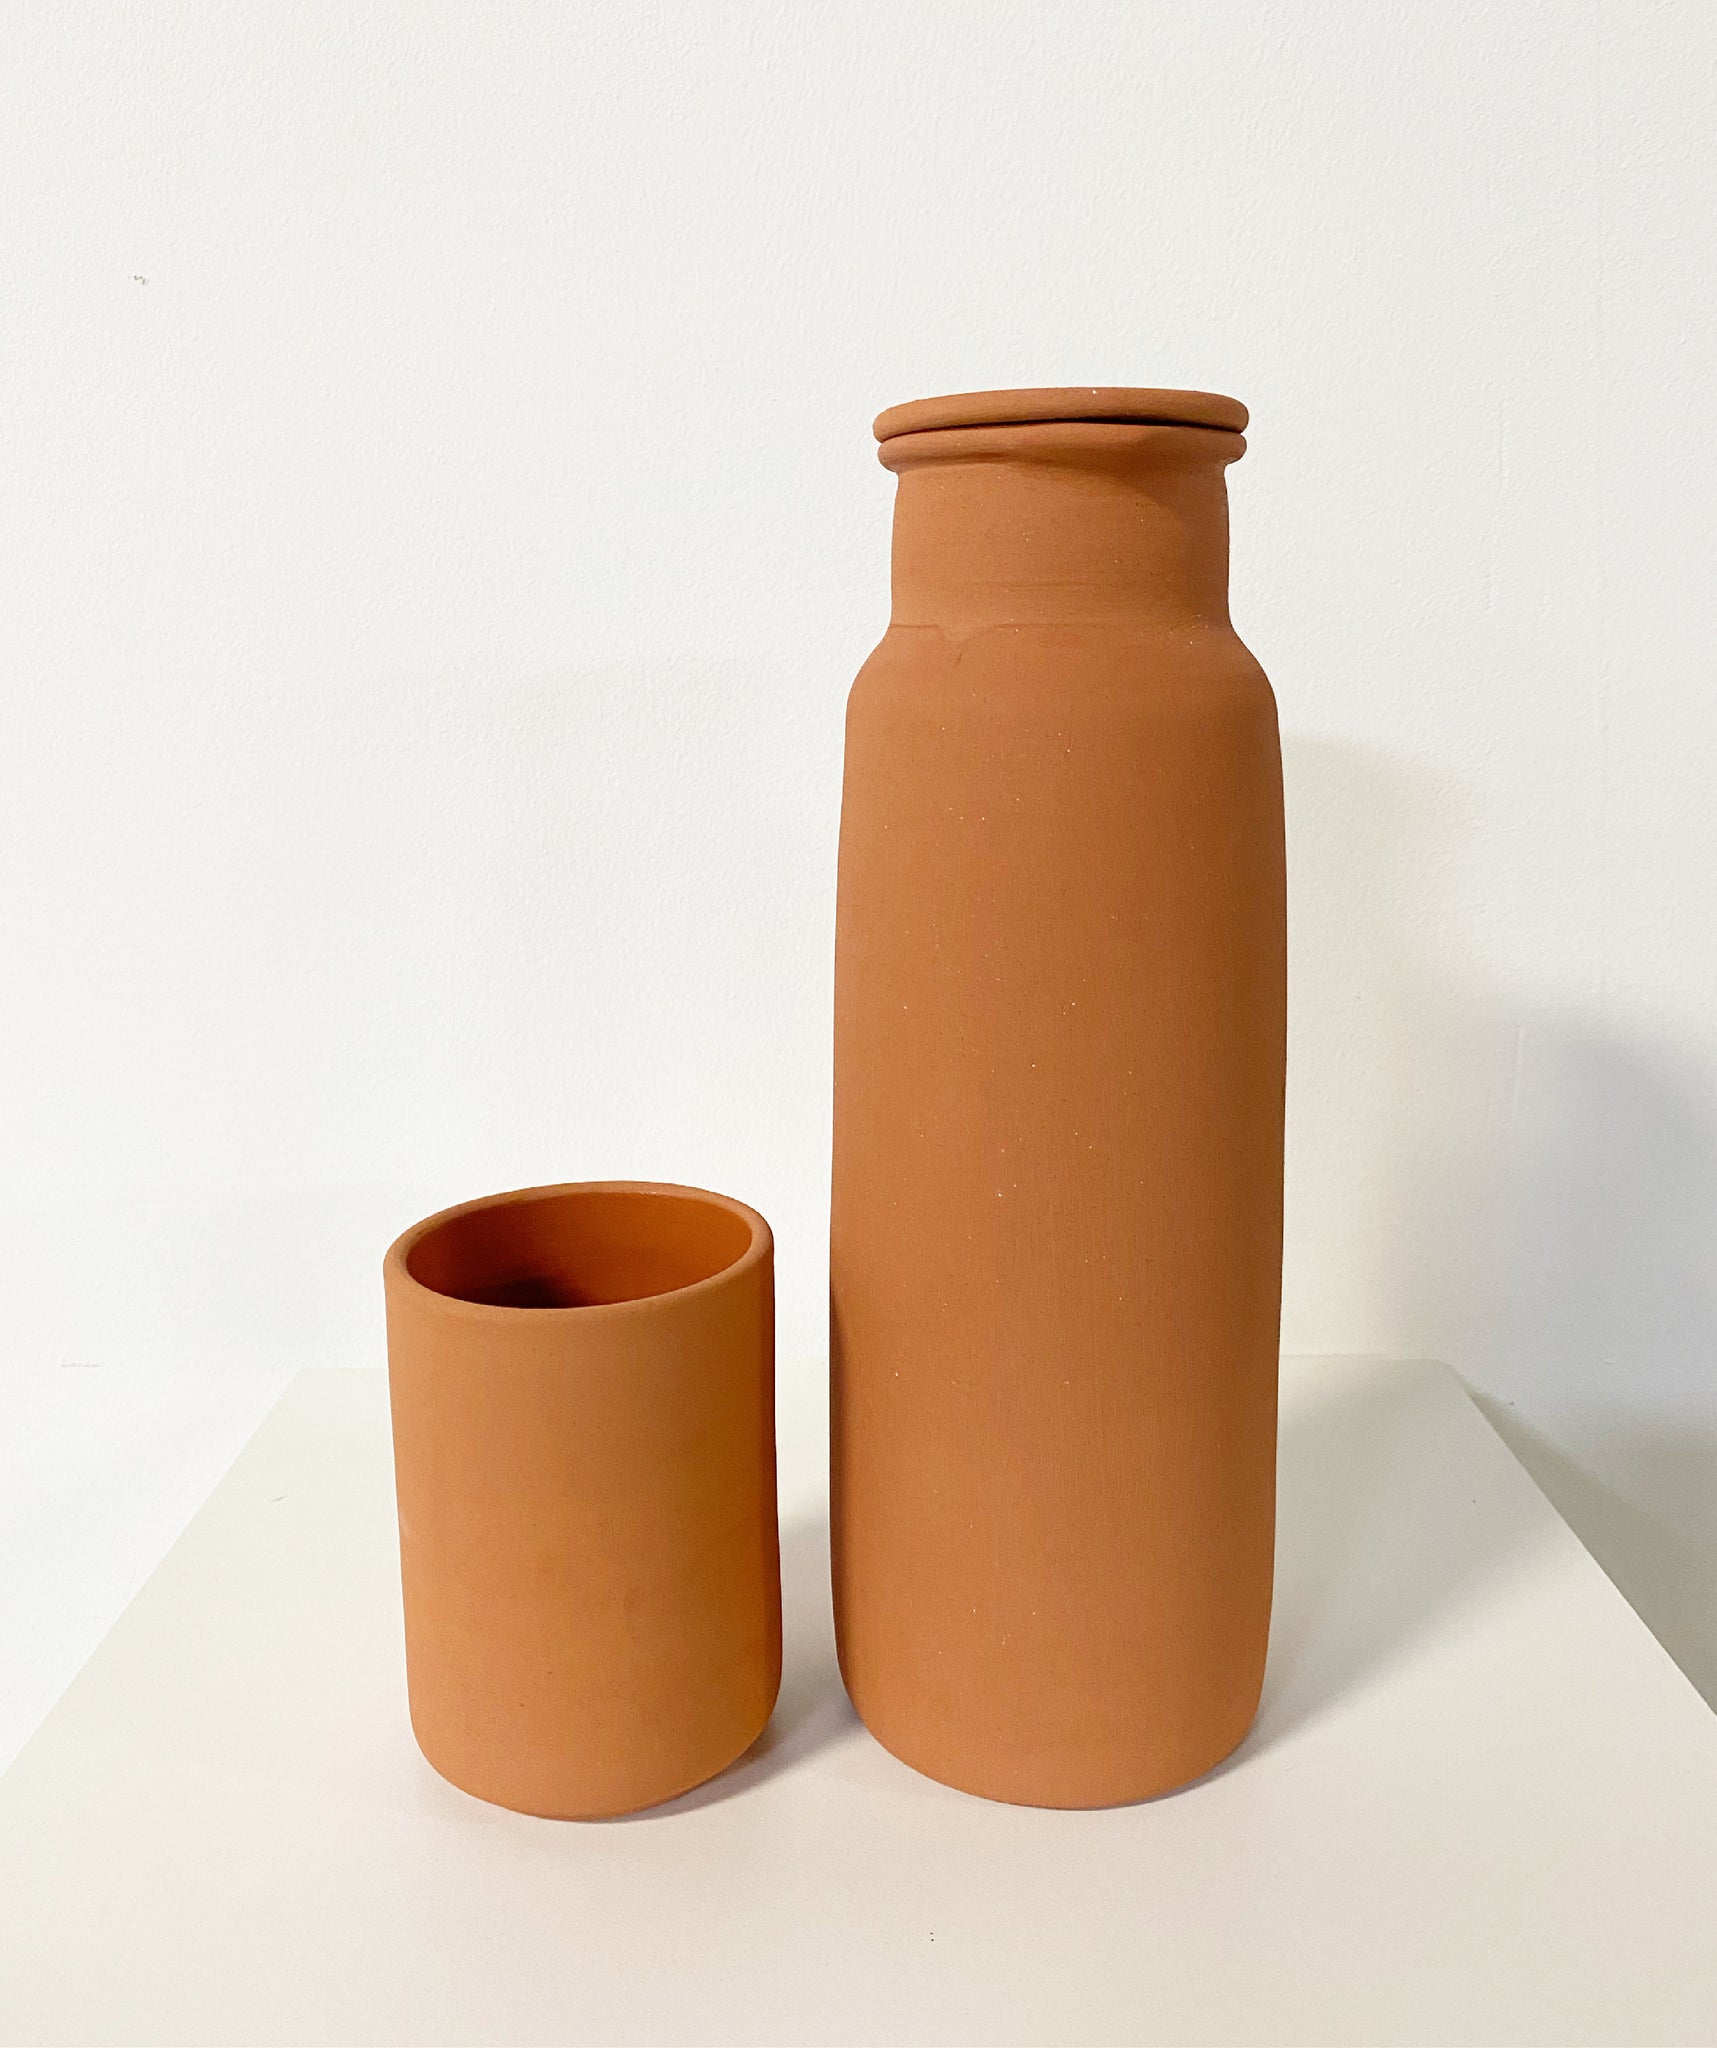 Clay Cup - Terracotta